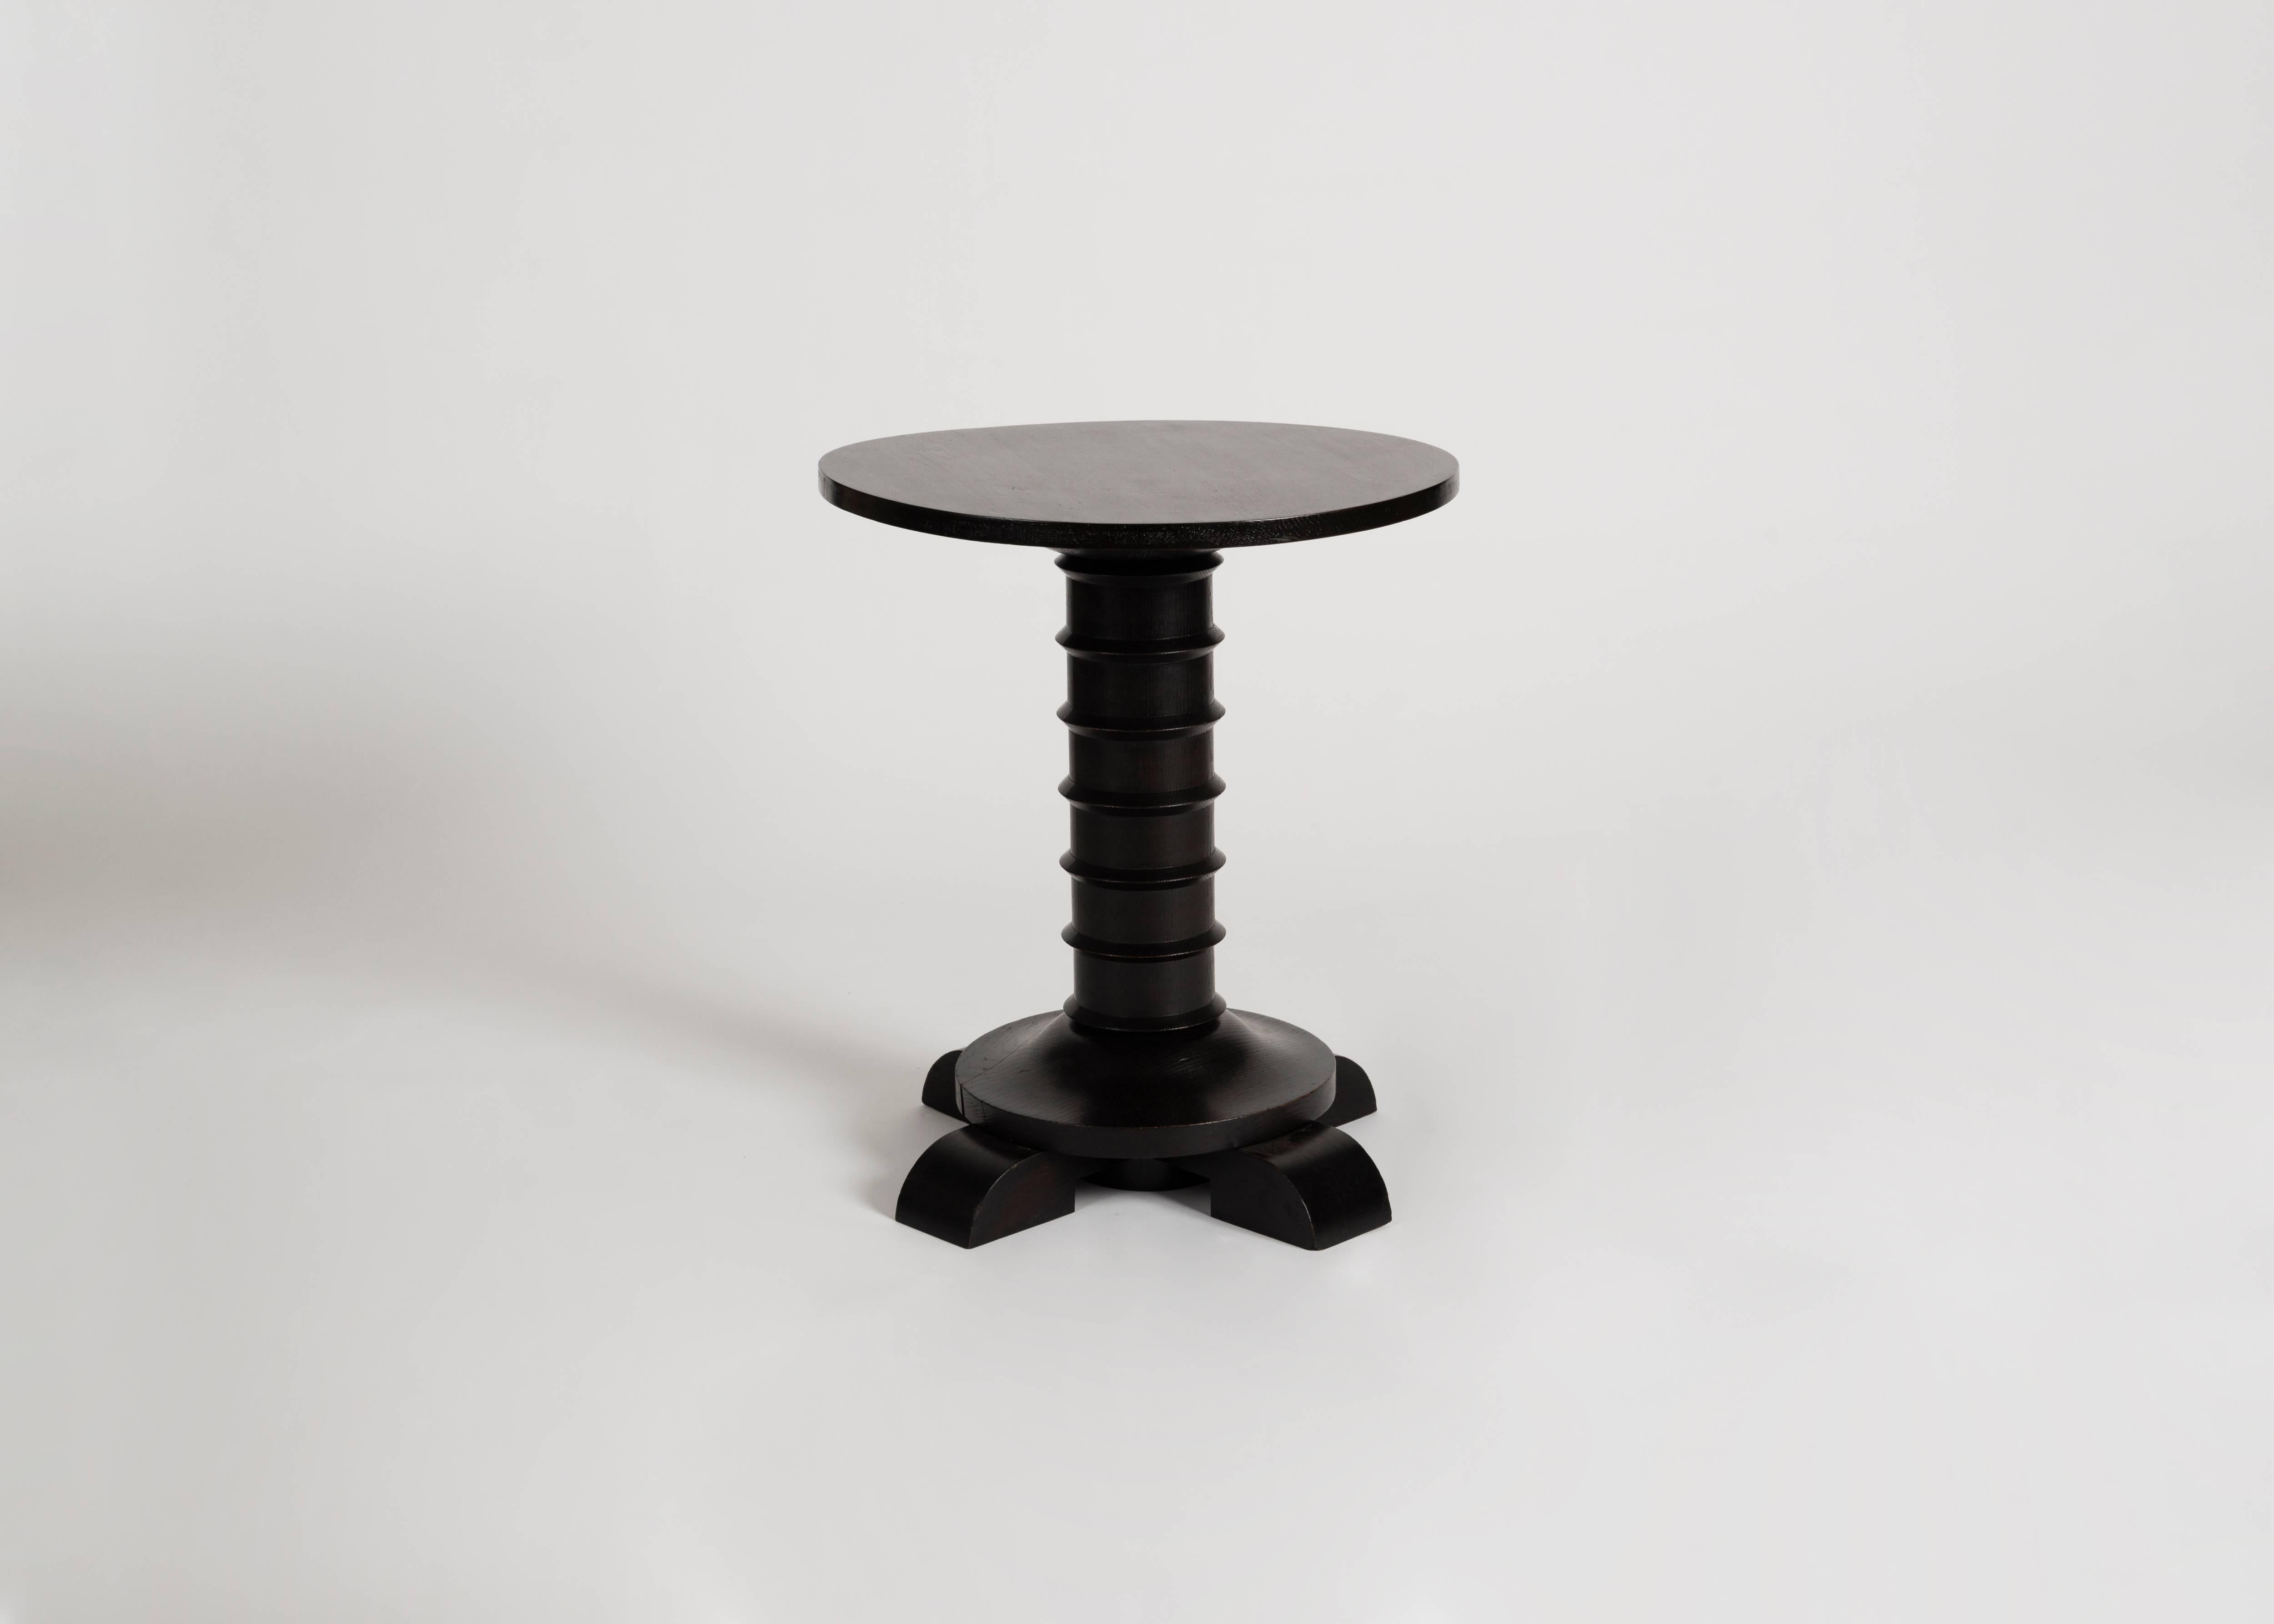 This table in blackened wood by Charles Dudouyt possesses a round, flat top and four stout legs, upon which rests a cylindrical body accented with well-spaced horizontal bands.